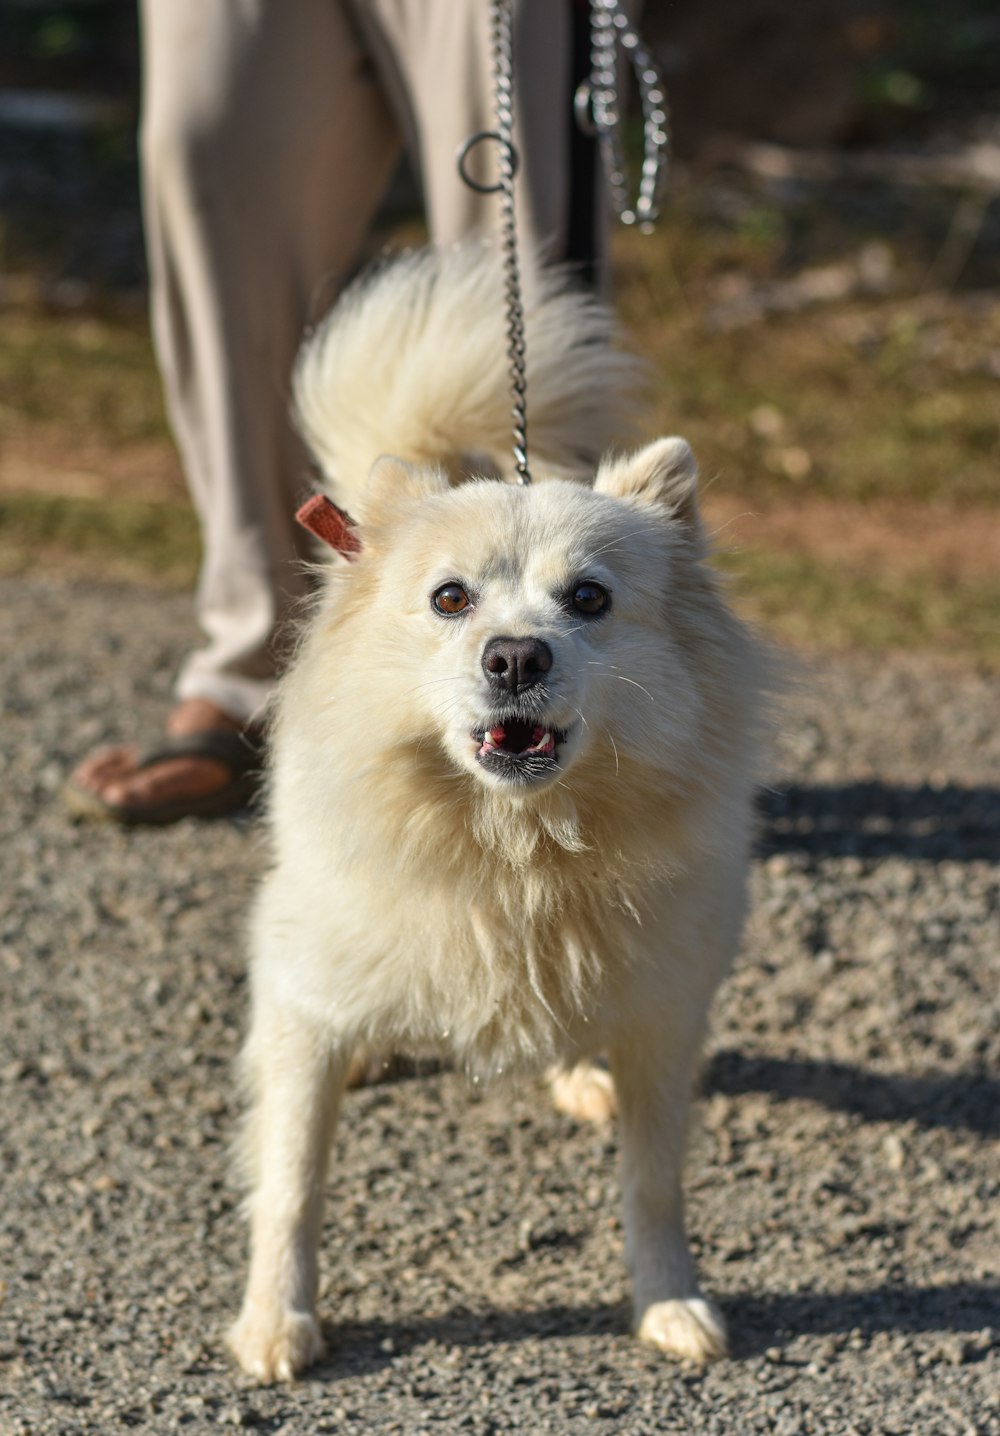 a small white dog on a leash being walked by a person